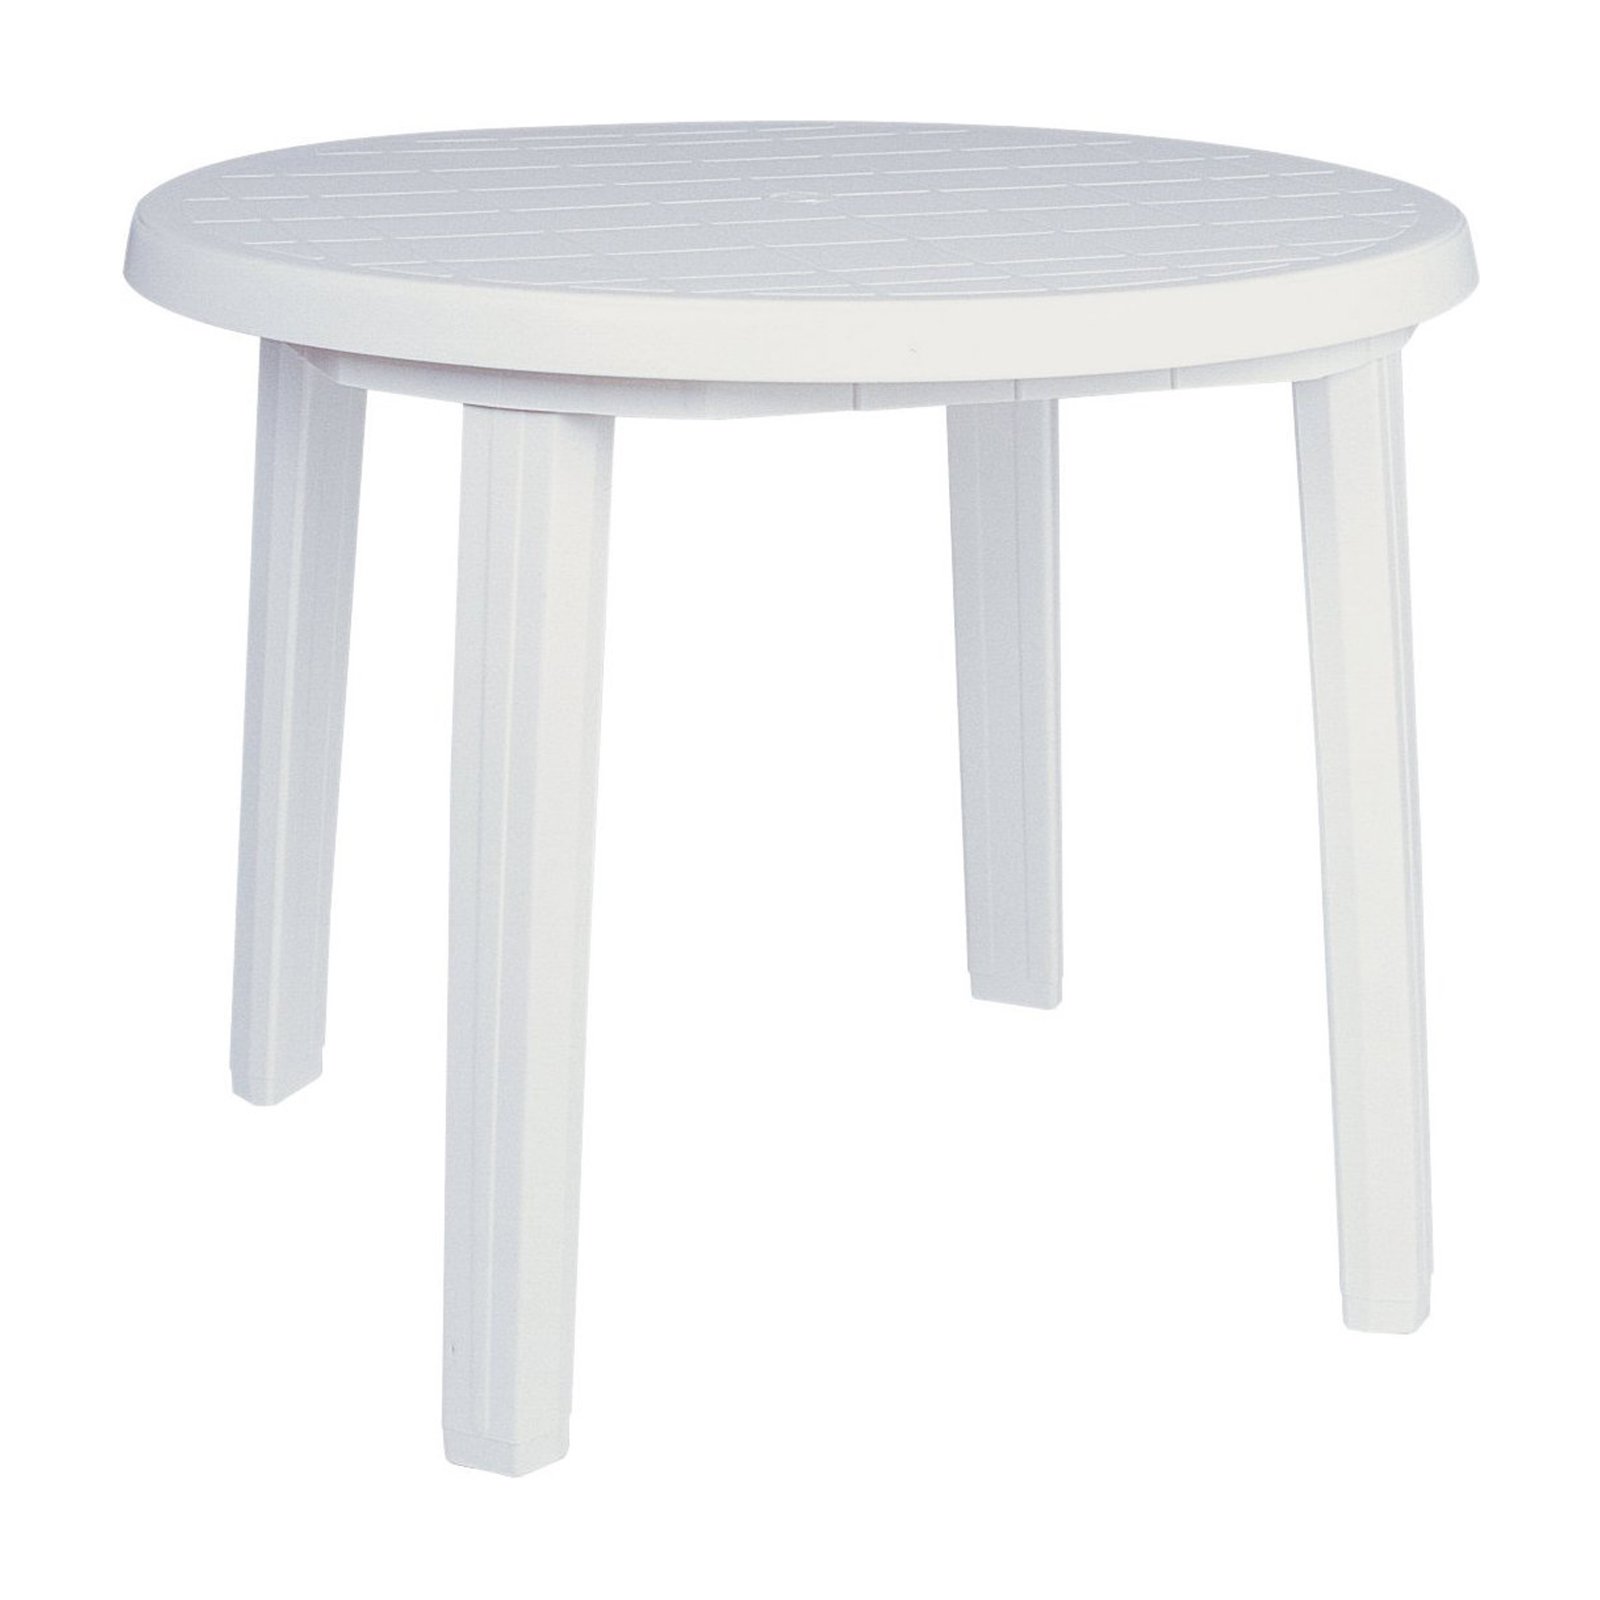 Compamia Ronda 36" Round Resin Outdoor Patio Dining Table in White - image 1 of 4